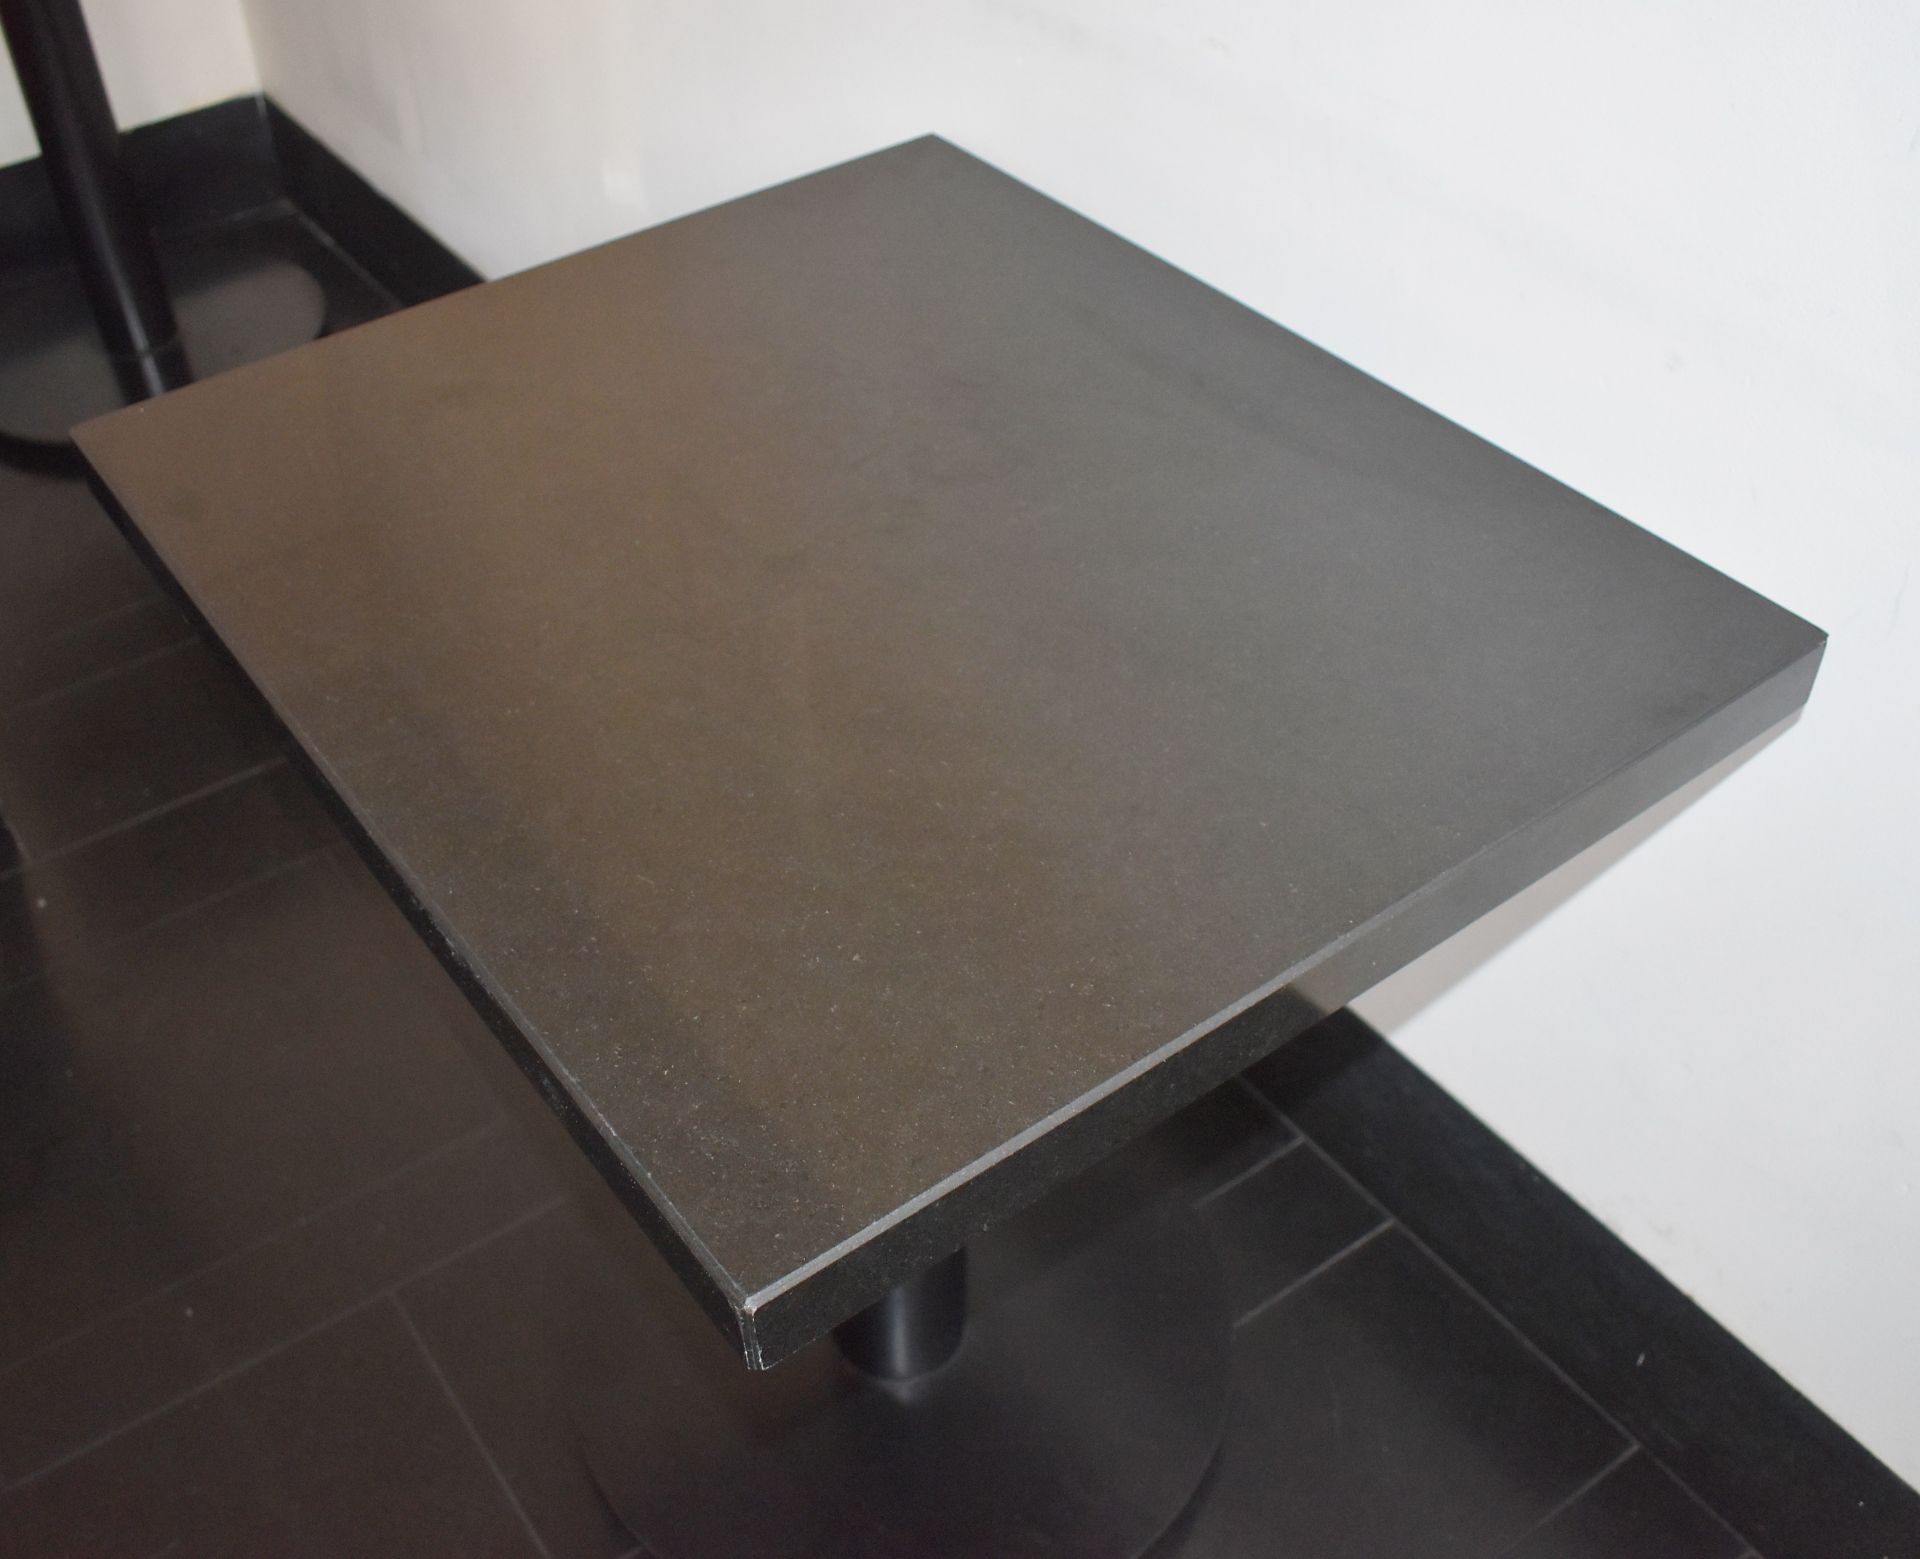 4 x Restaurant Bistro Tables With Granite Stone Tops and Substantial Metal Bases - Dimensions: H77 x - Image 3 of 7